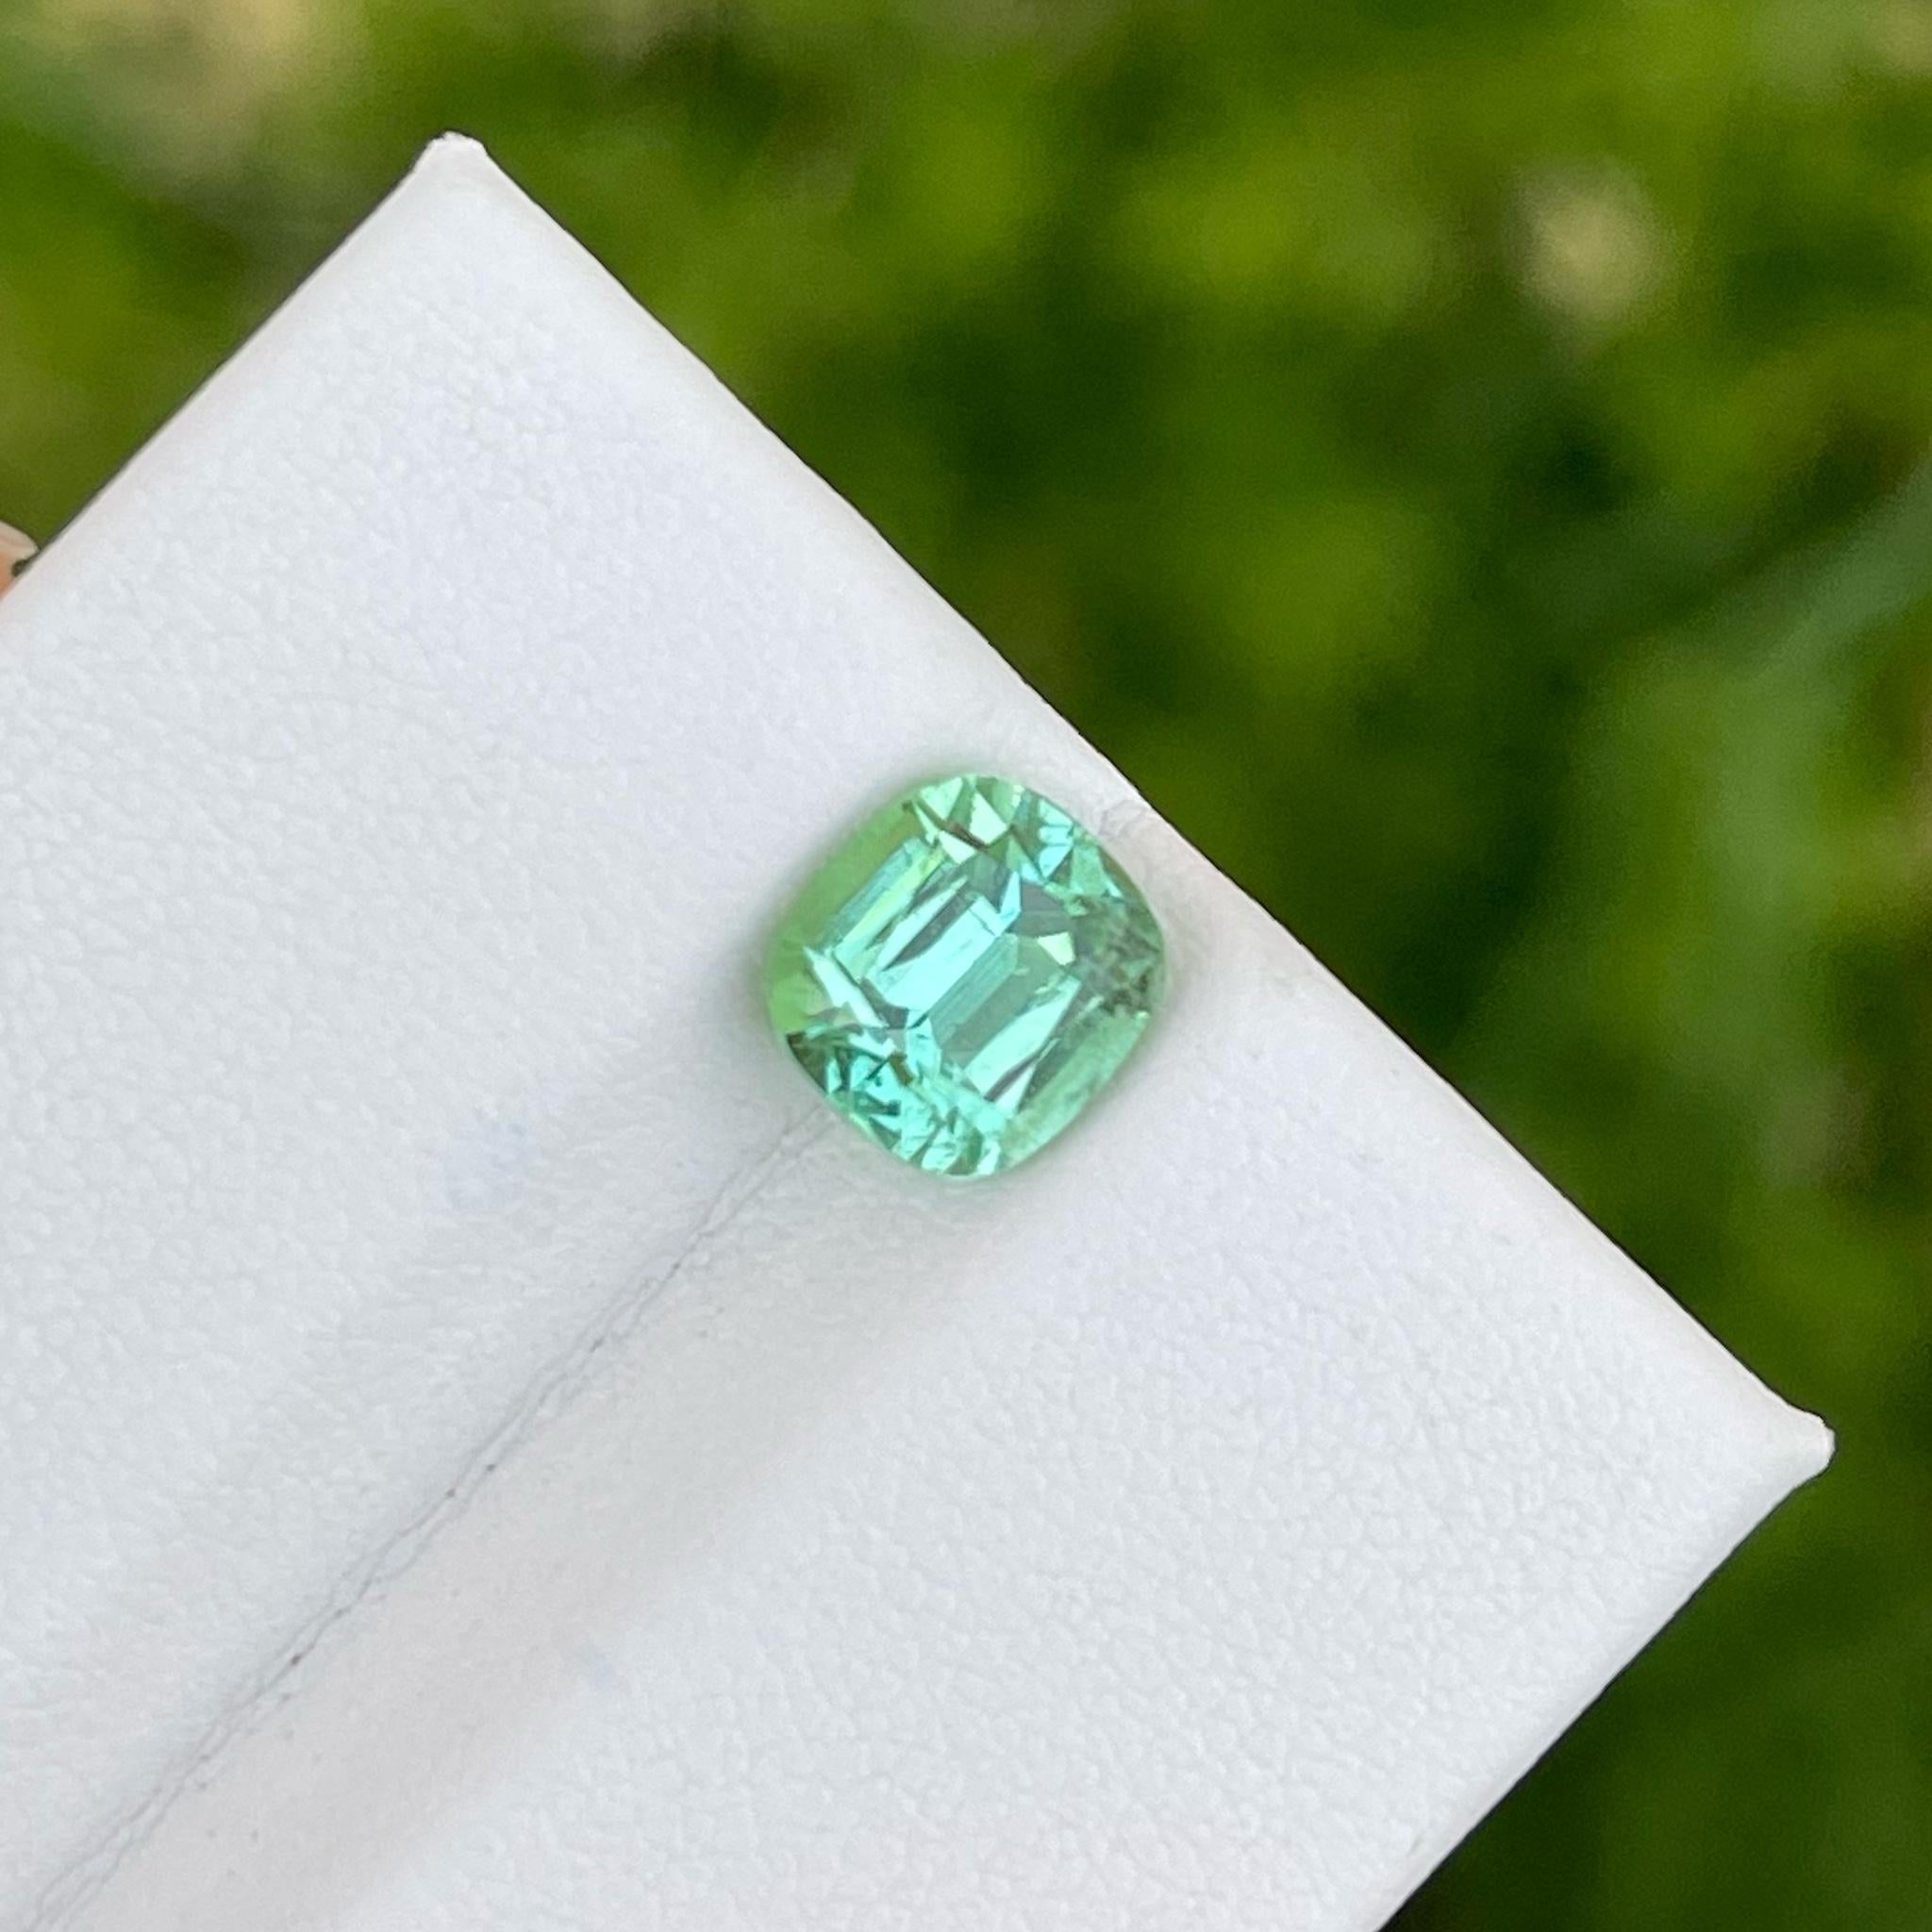 Weight 2.45 carats 
Dimensions 8.3 x 7.8 x 5.6mm
Treatment None 
Origin Afghanistan 
Clarity VVS (Very, Very Slightly Included)
Shape Cushion
Cut Fancy Cushion


Experience the luxury of owning a genuine mint green Tourmaline gemstone. With limited